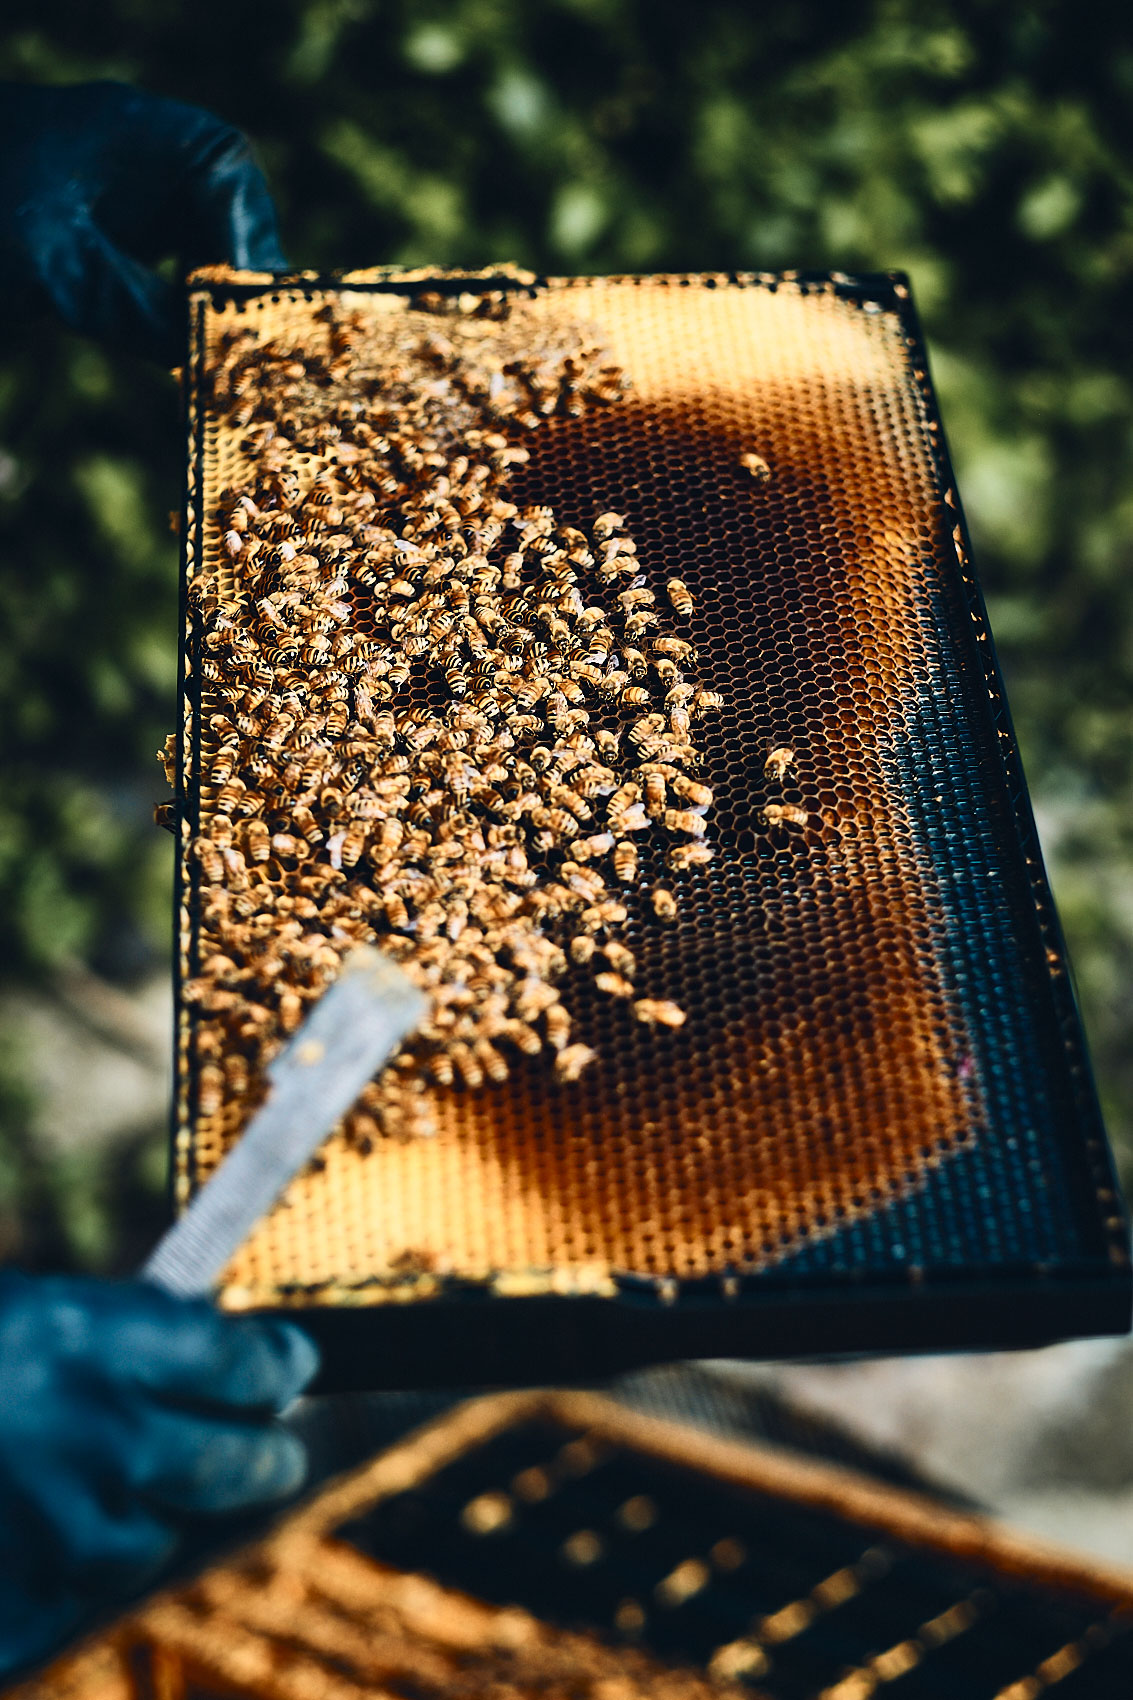 Our Beehive • Fresh Honeycomb from Home Garden Beehive • Lifestyle & Documentary Food Photography